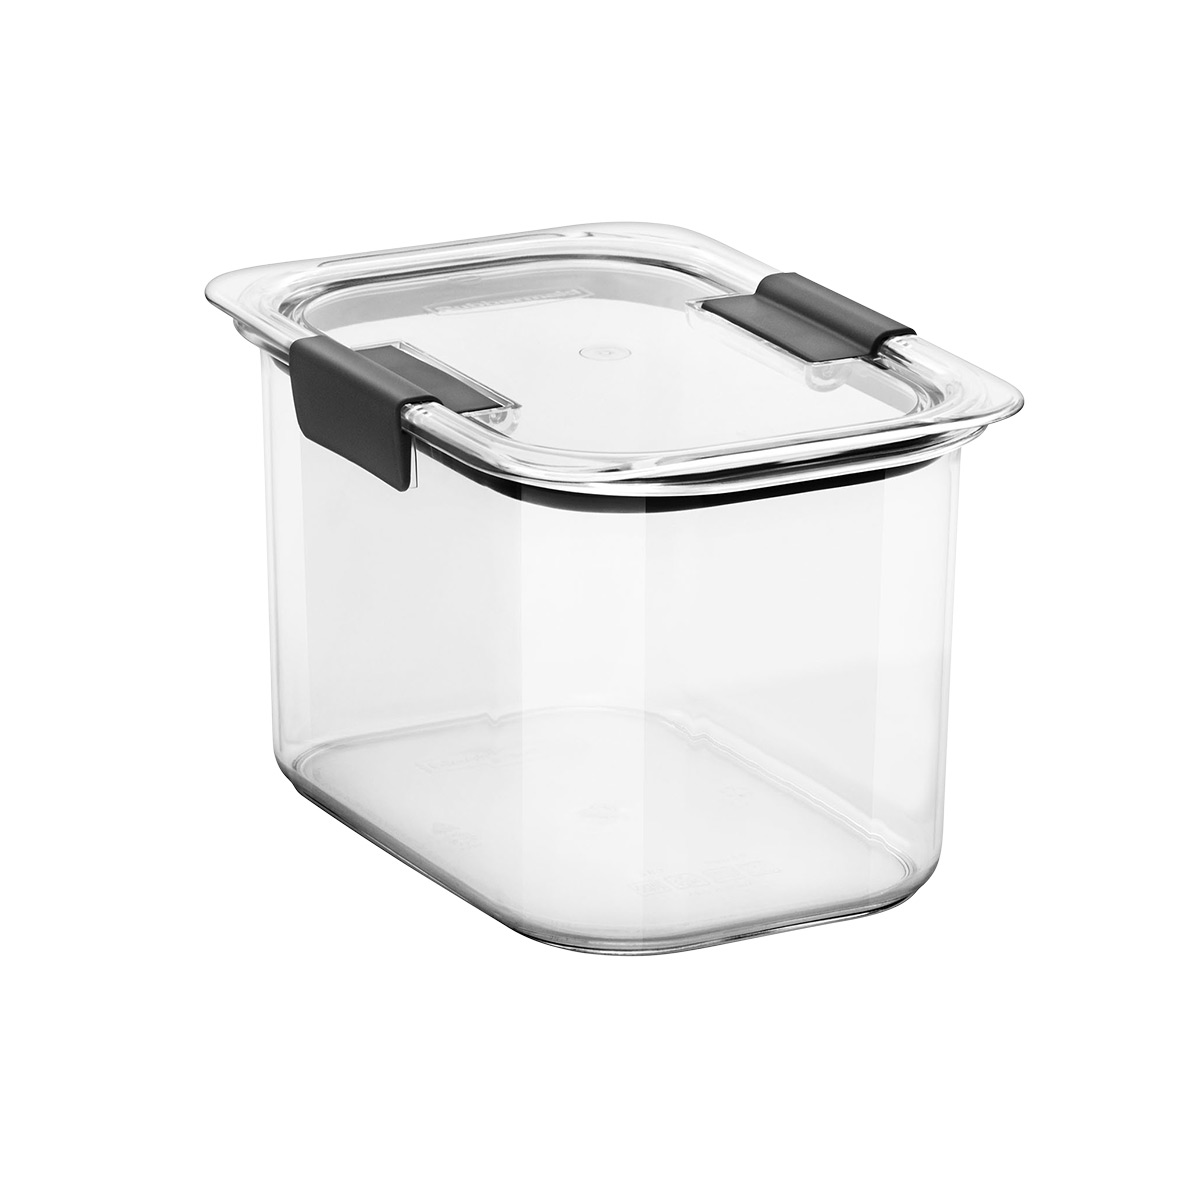 Rubbermaid Brilliance 7.8 Cup Brown Sugar Pantry Airtight Food Storage  Container